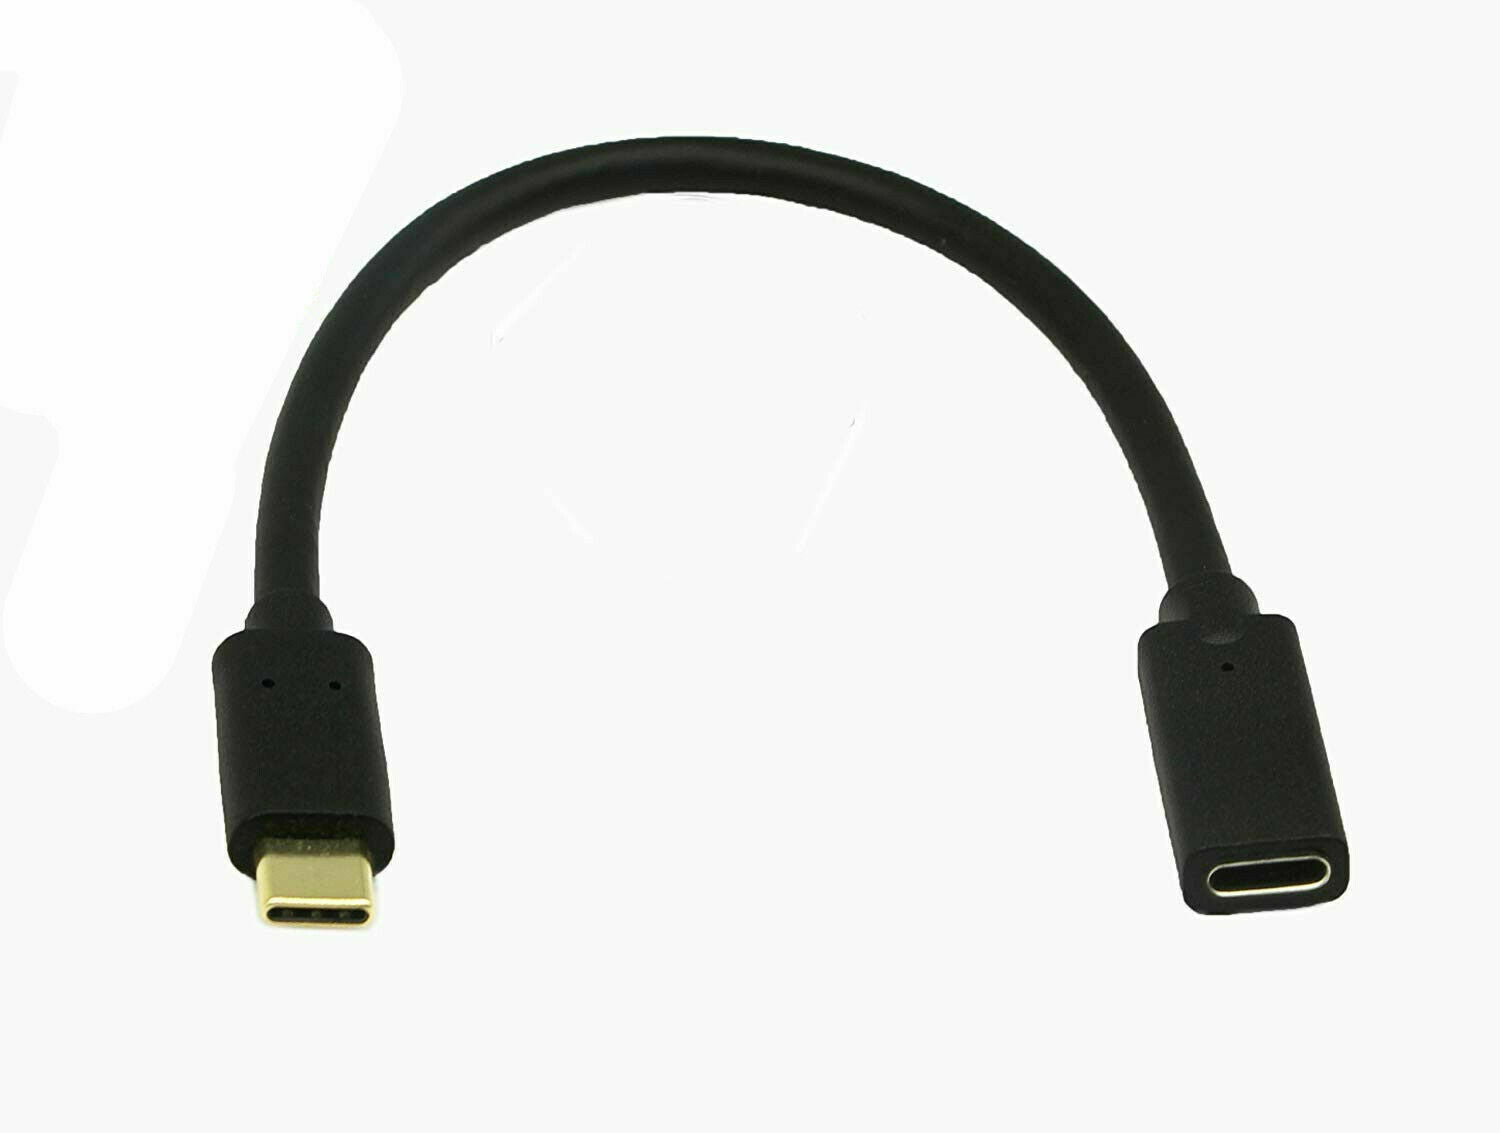 USB 3.1 Type-C Male to Female Fast Charging Extension Cable